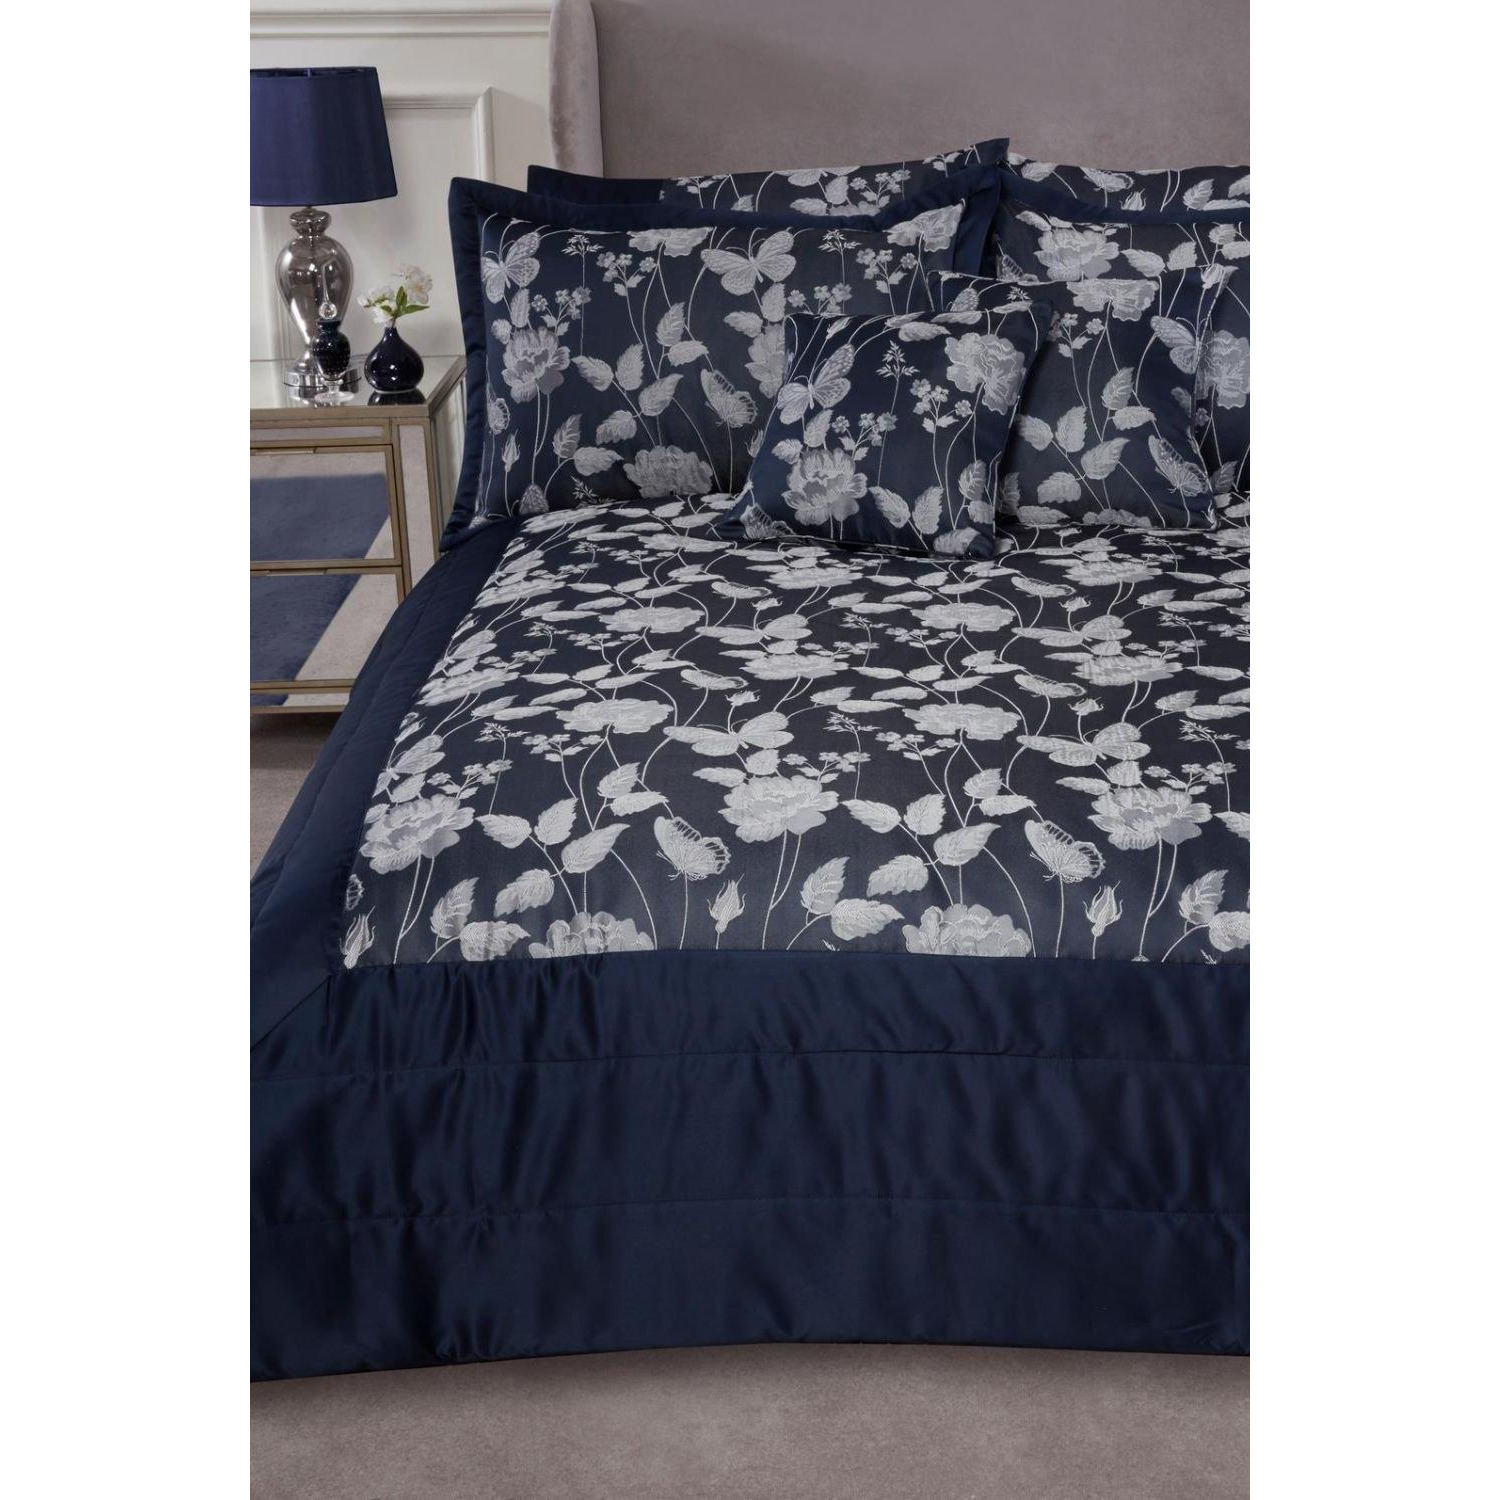 Butterfly Meadow Floral Jacquard Bedspread Set - image 1